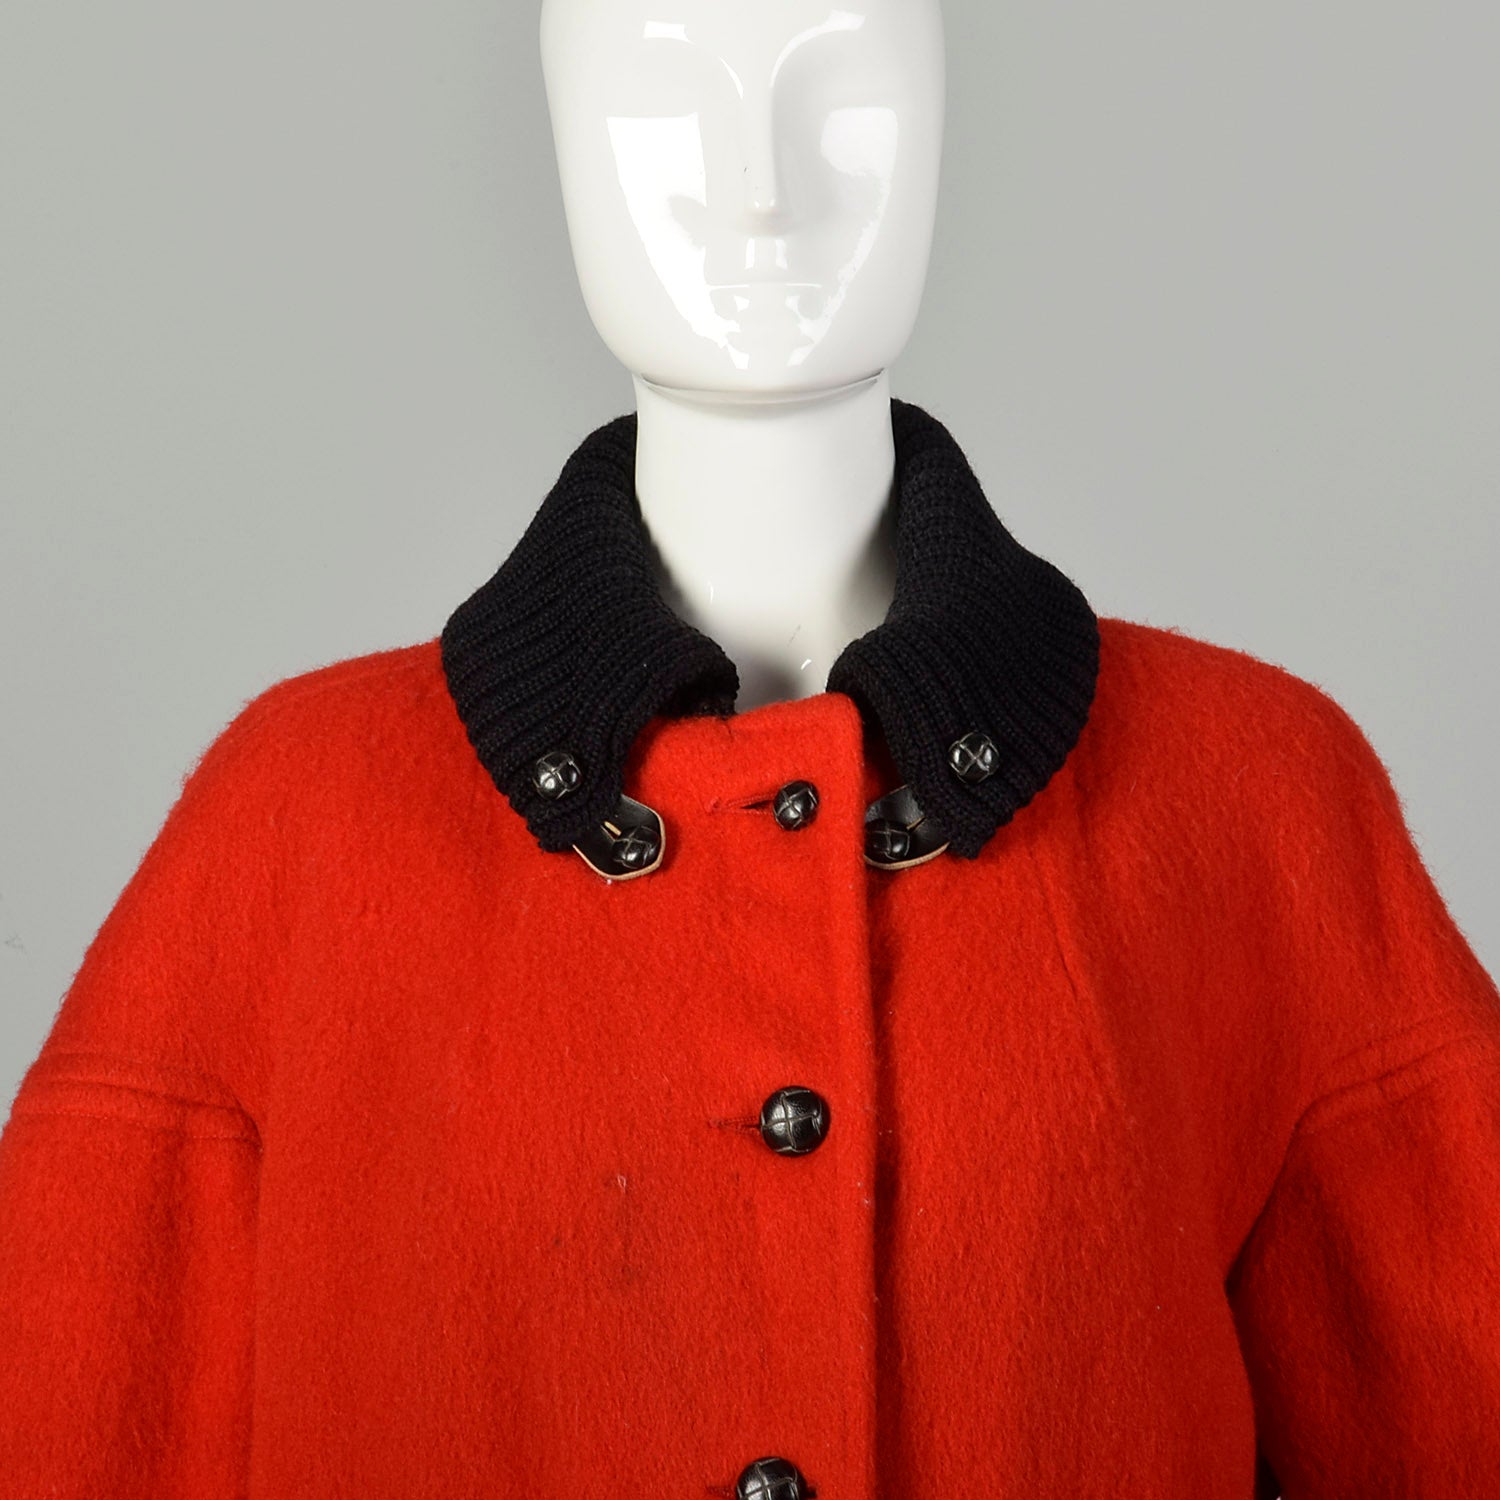 Large 1960s Hudson Bay Coat Red Wool Vintage Winter Outerwear Faux Shearling